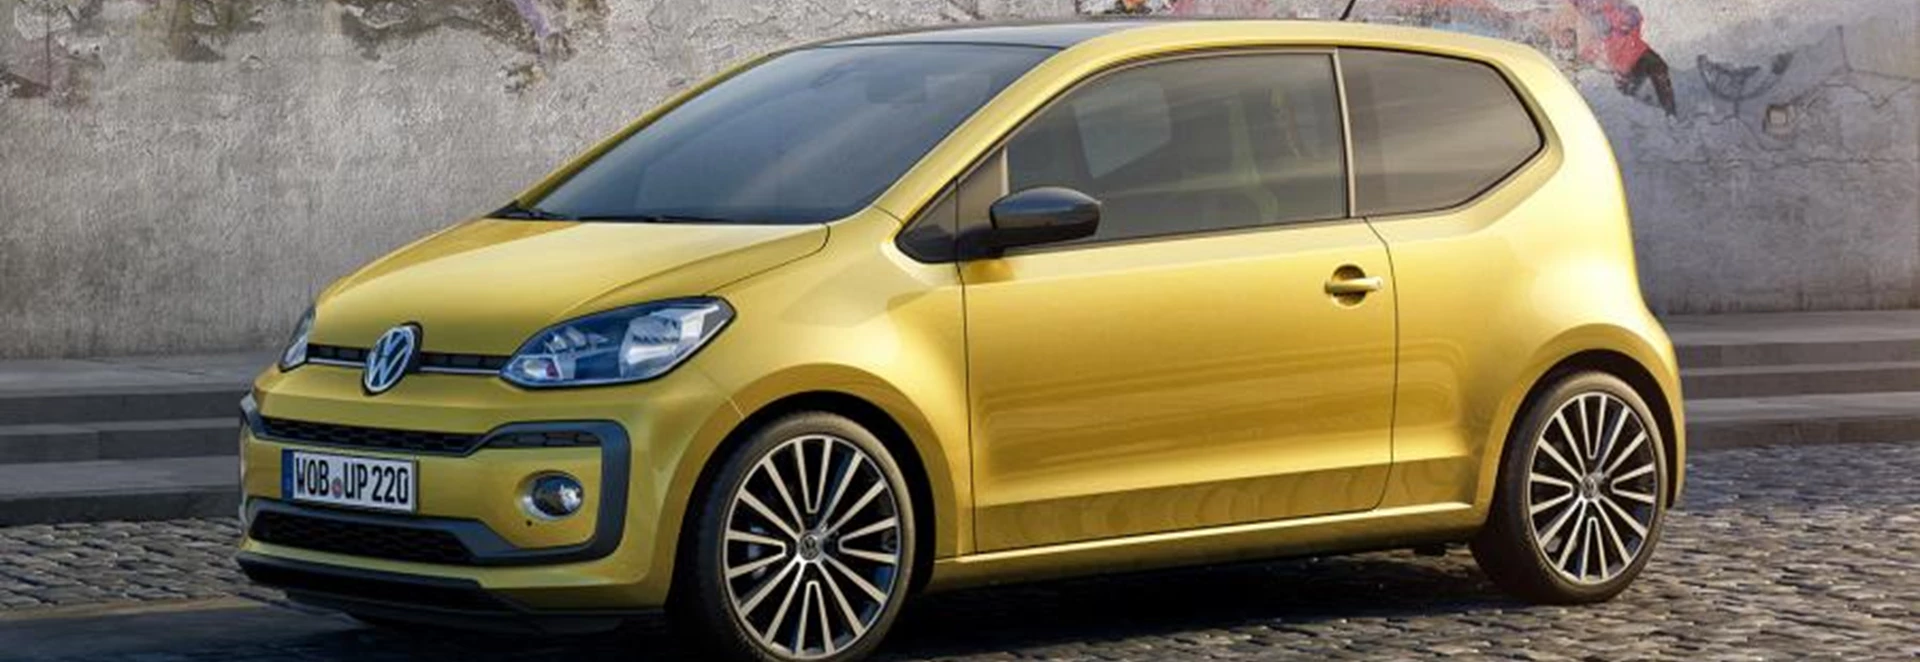 Facelifted Volkswagen Up adds turbo power